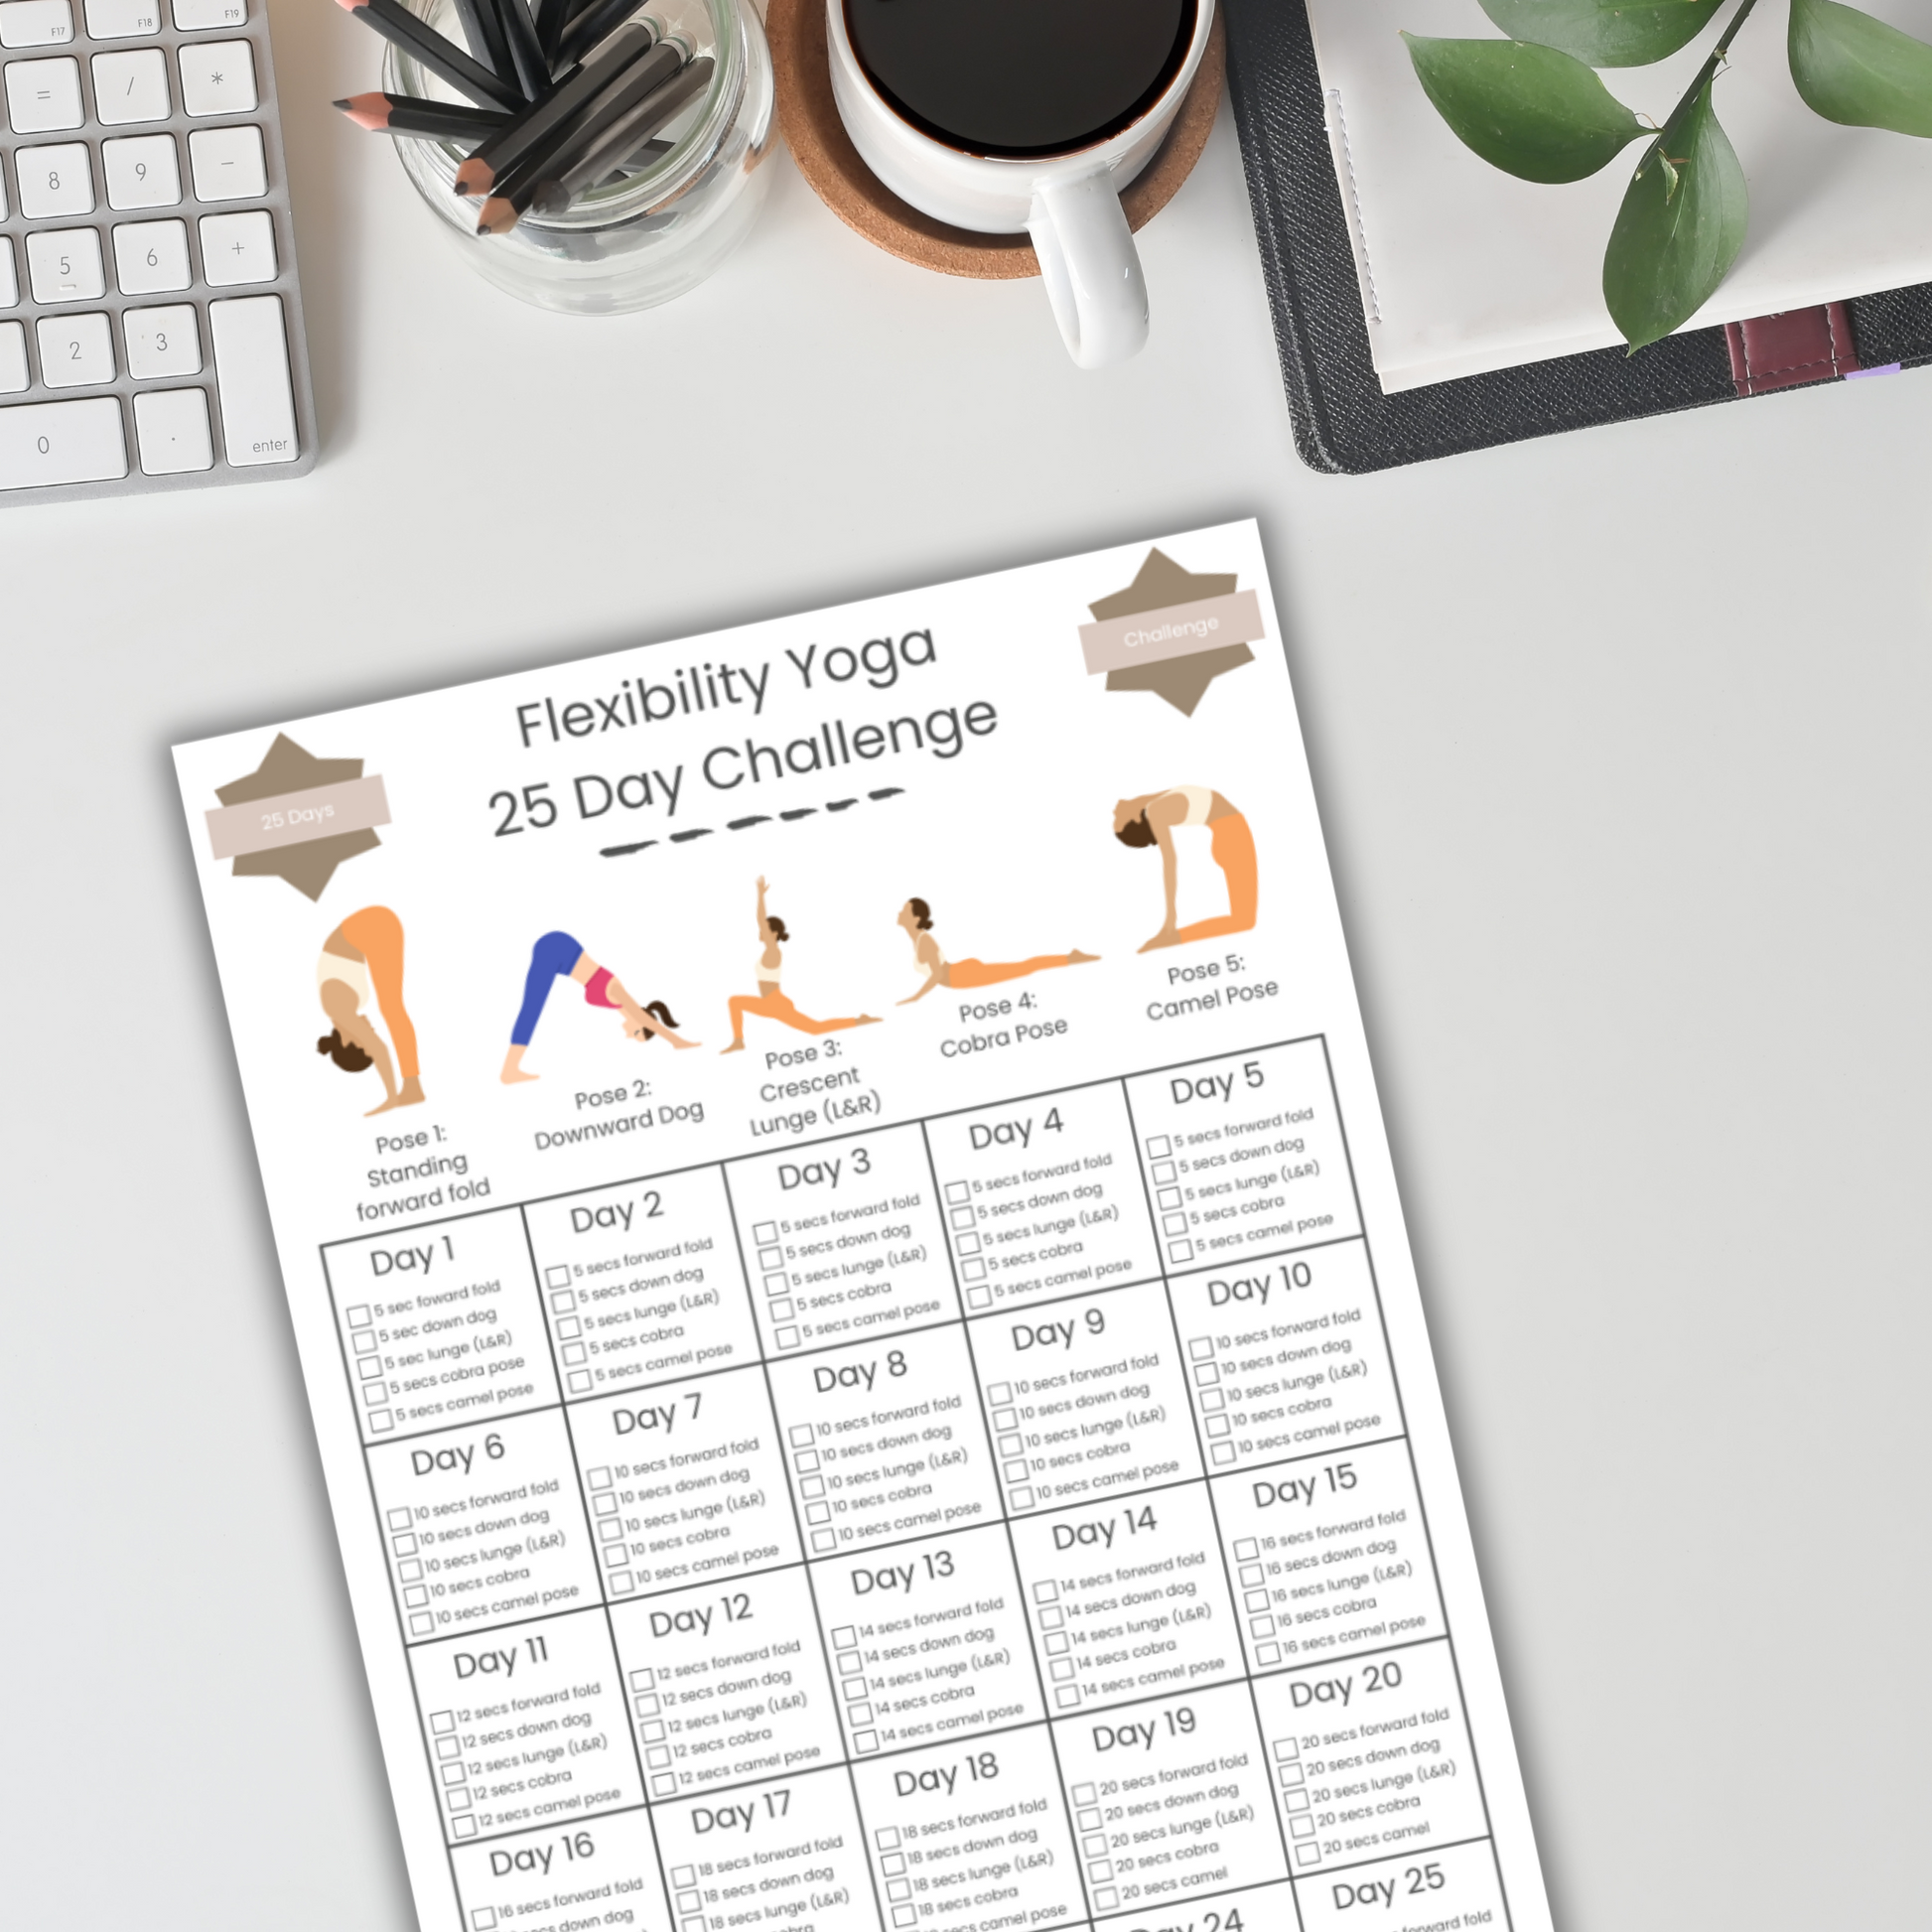 yoga poses,yoga illustrations,good morning yoga,evening stretches,flexibility moves,yoga flow poster,gift for yoga lover,yoga pose with names,poster wall art,printable pdf a4 a3,yoga teacher prints,stretching exercises,yoga poses digital